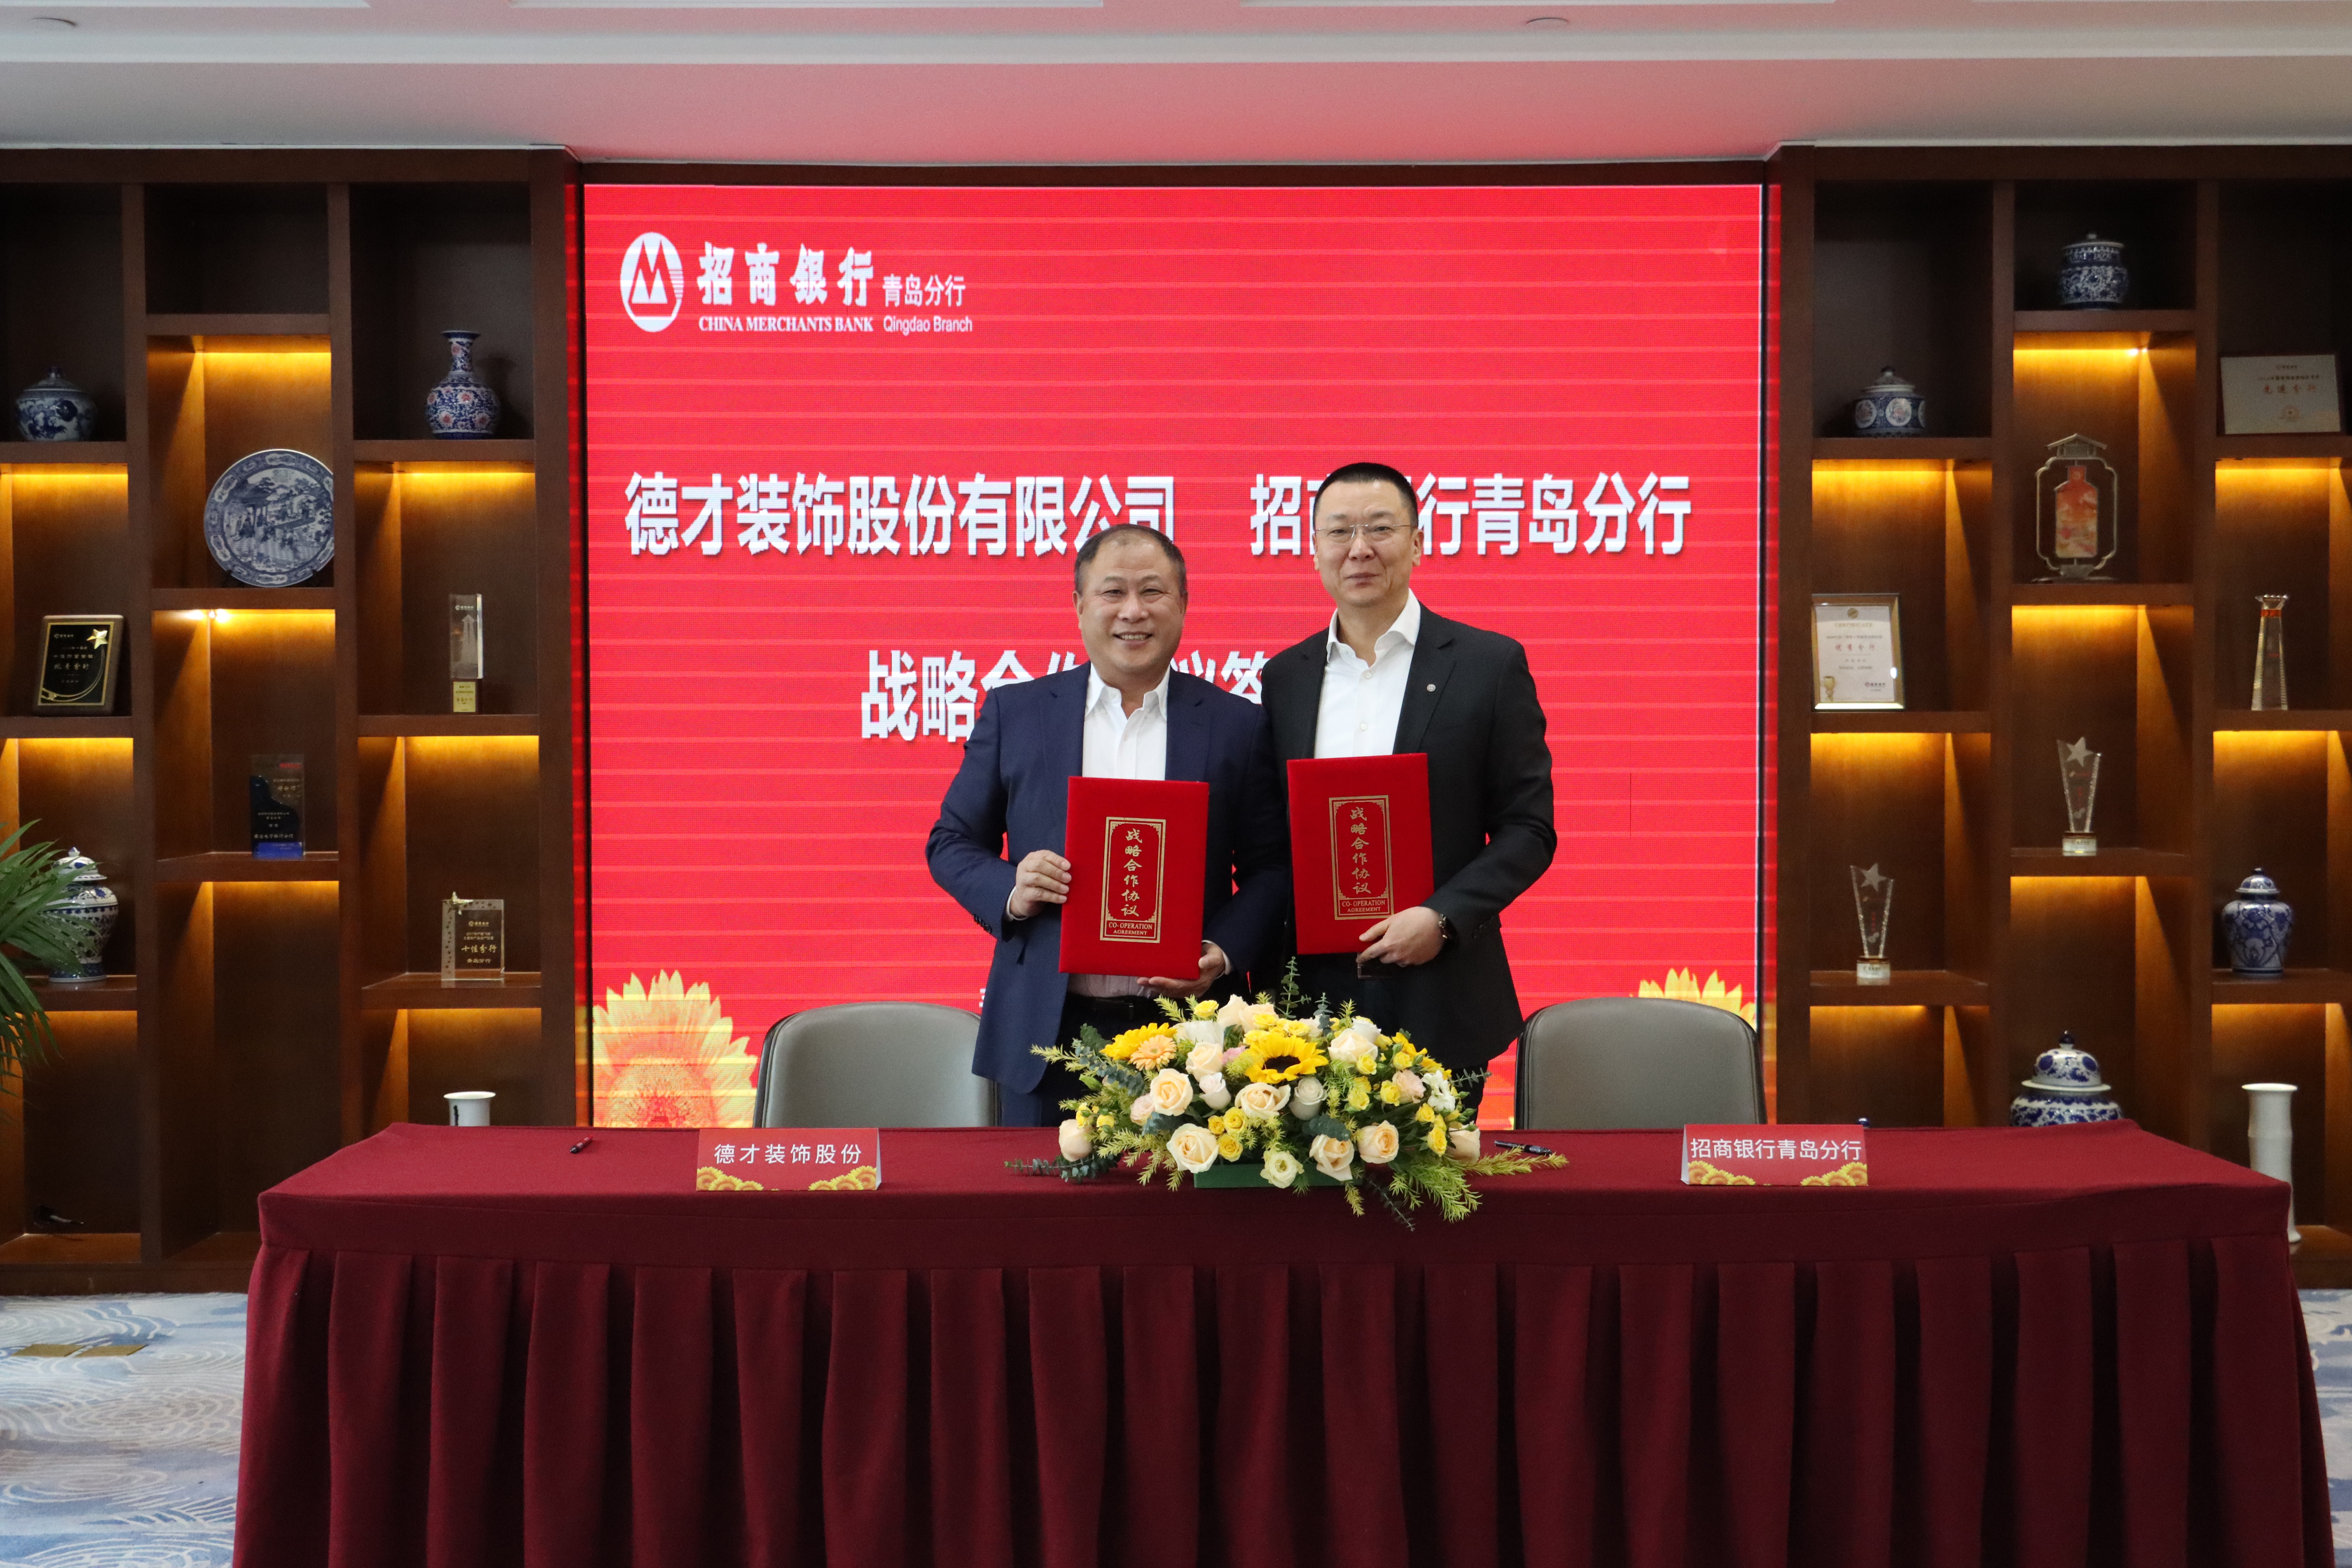 Decai Shares signed a strategic cooperation agreement with China Merchants Bank Qingdao Branch